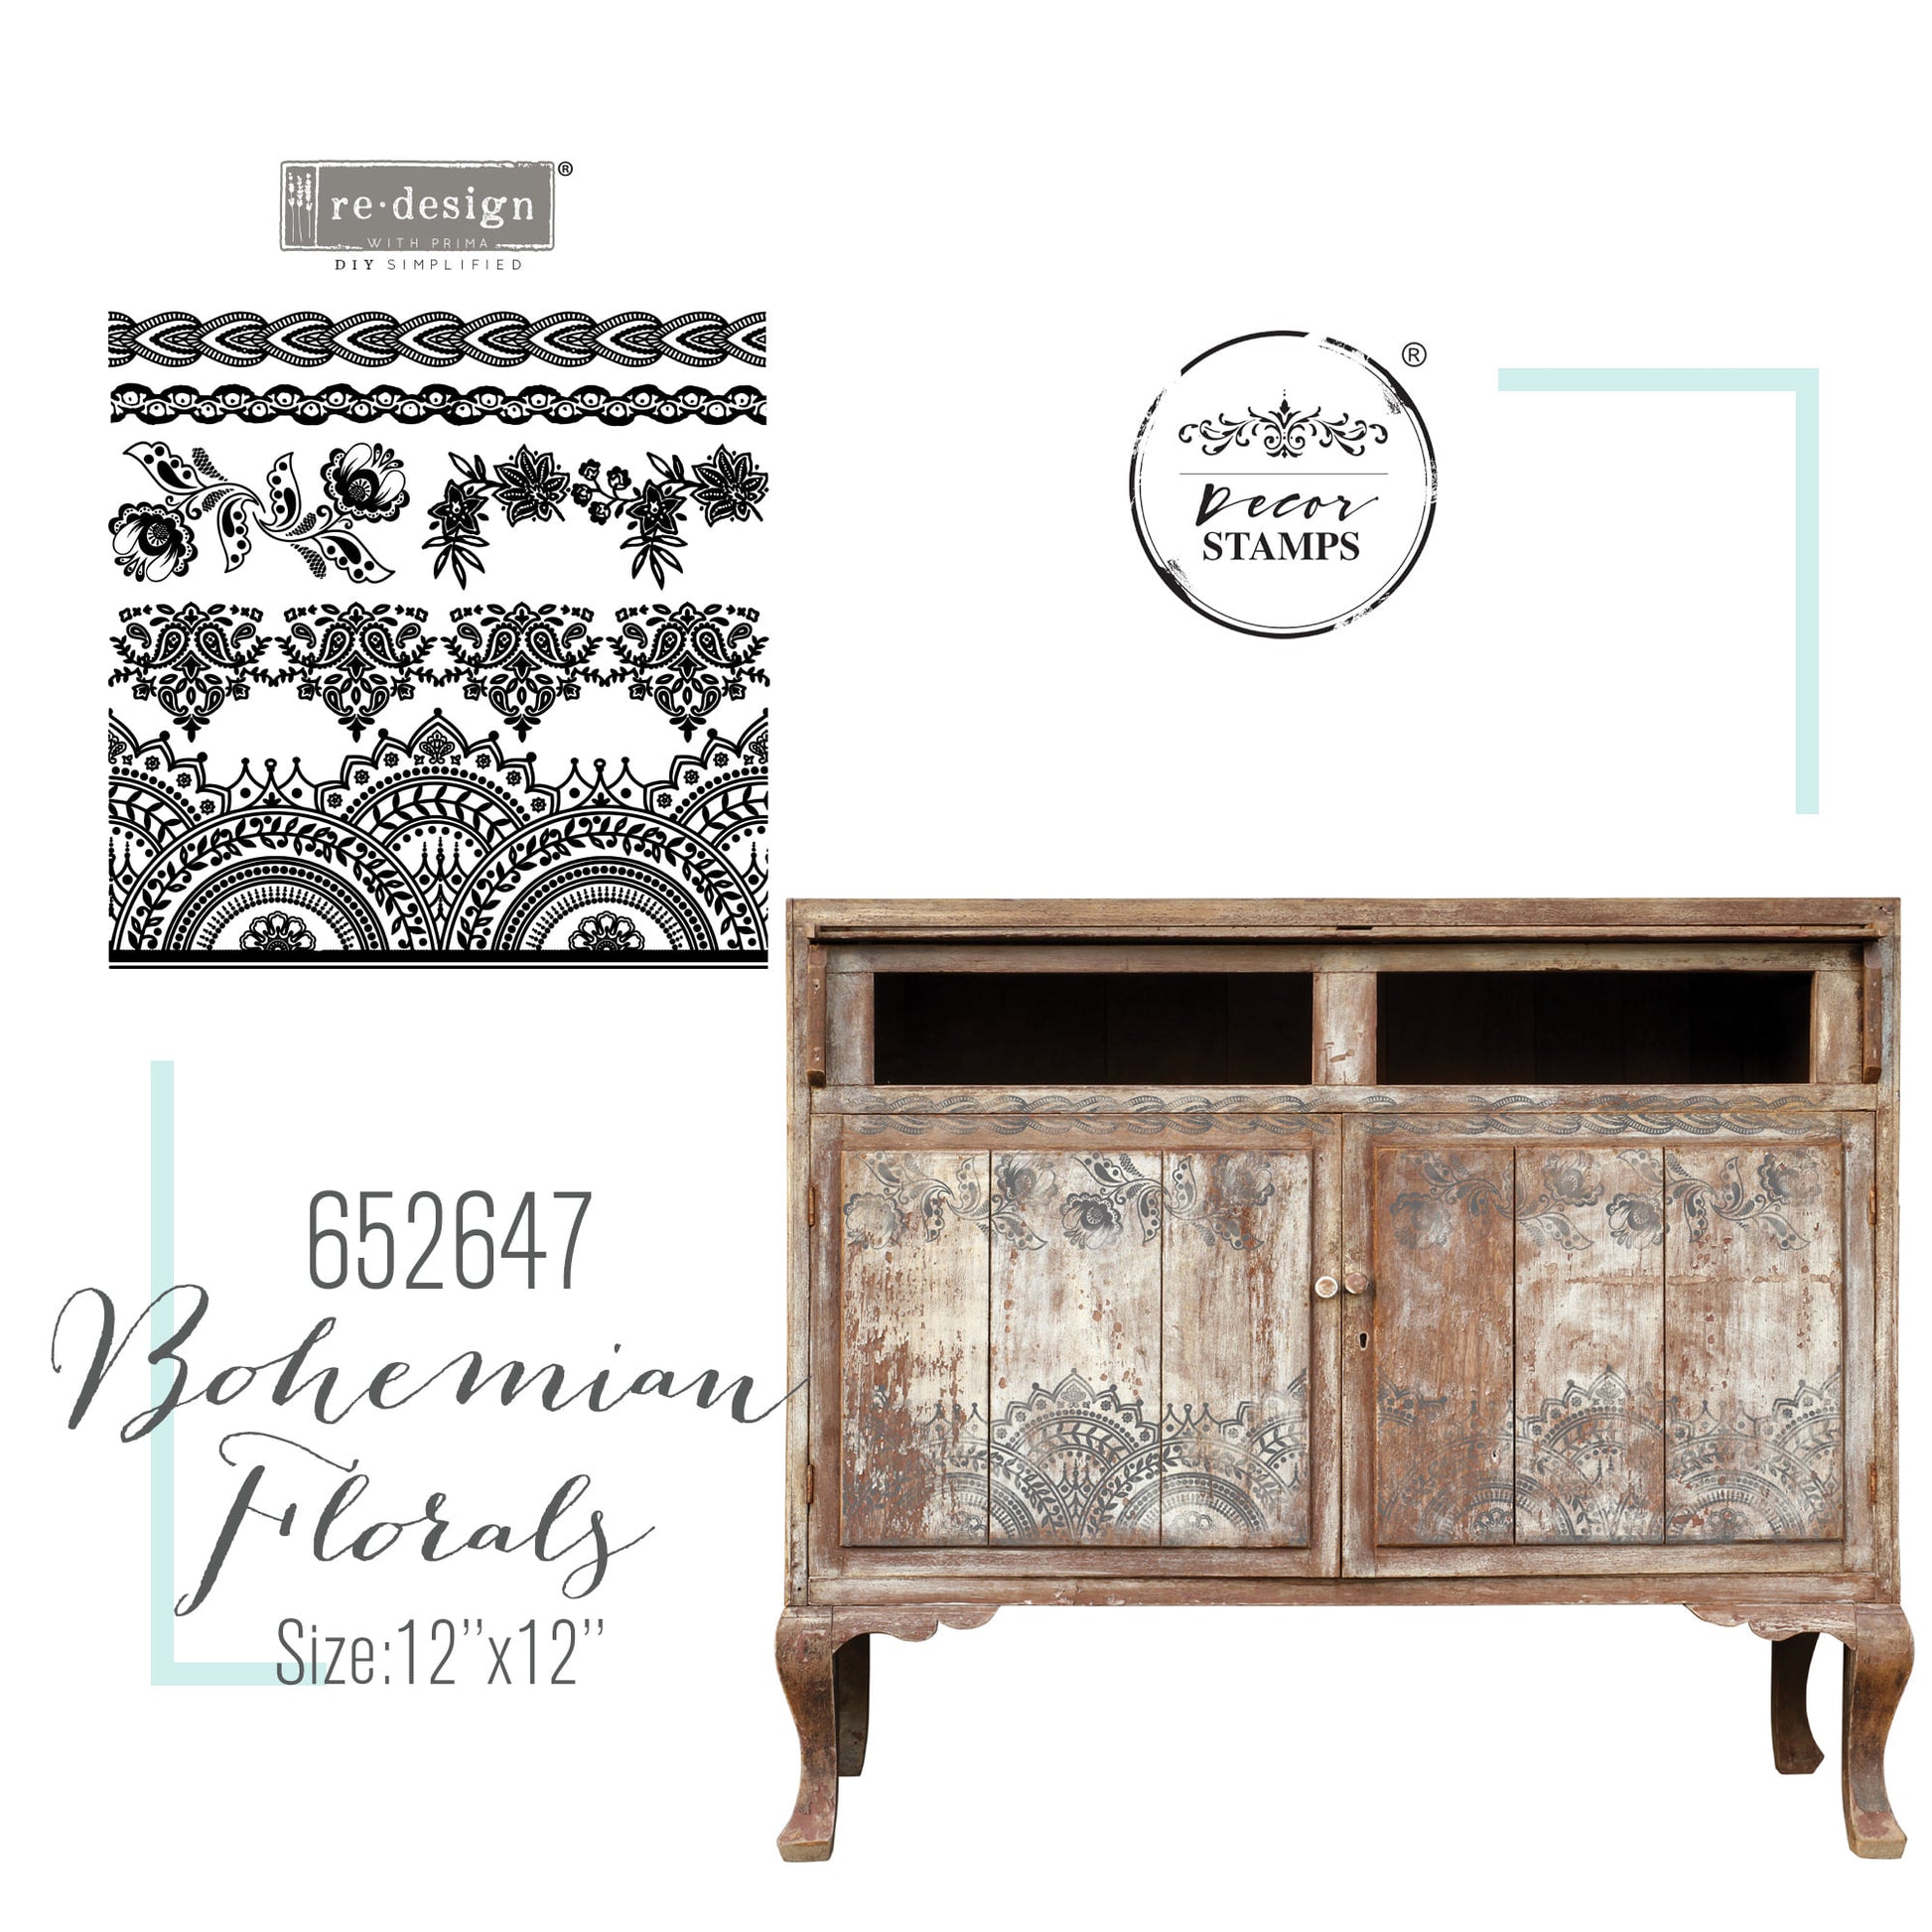 Redesign Decor Stamp BOHEMIAN FLORALS | redesign-decor-stamp-bohemian-florals | Redesign With Prima